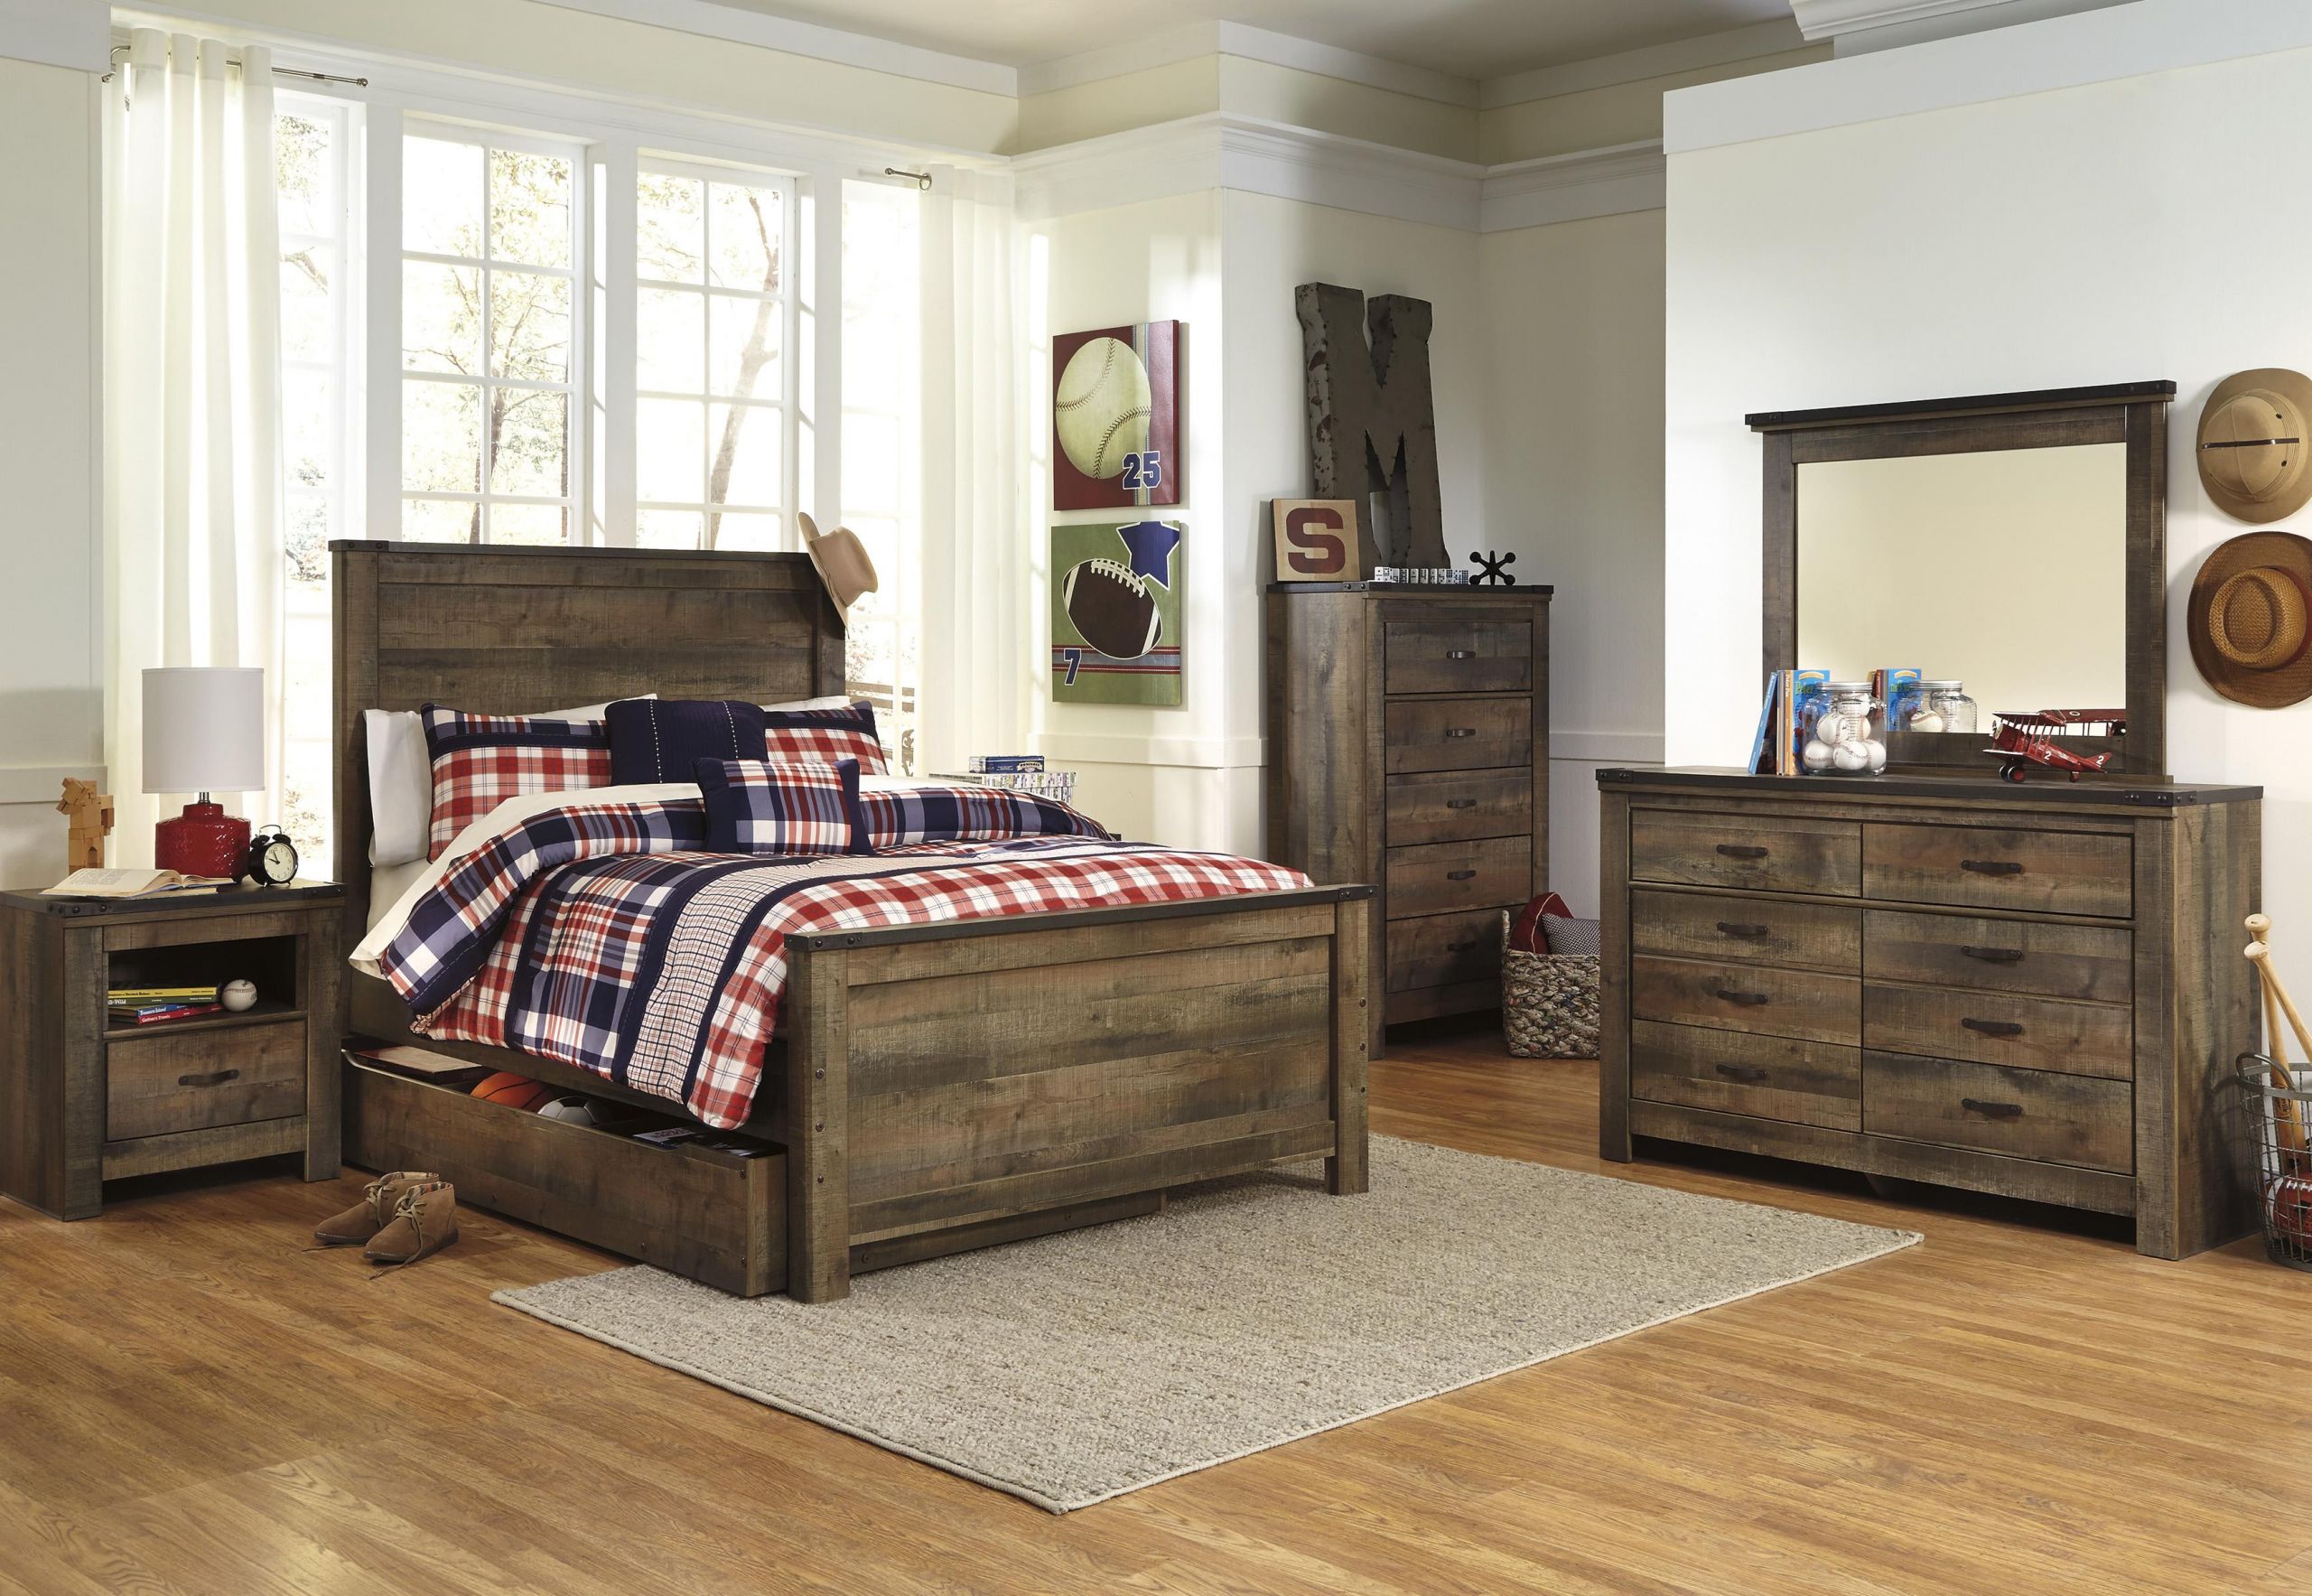 Ashley Kids Bedroom Set
 Signature Design by Ashley Trinell Full Bedroom Group